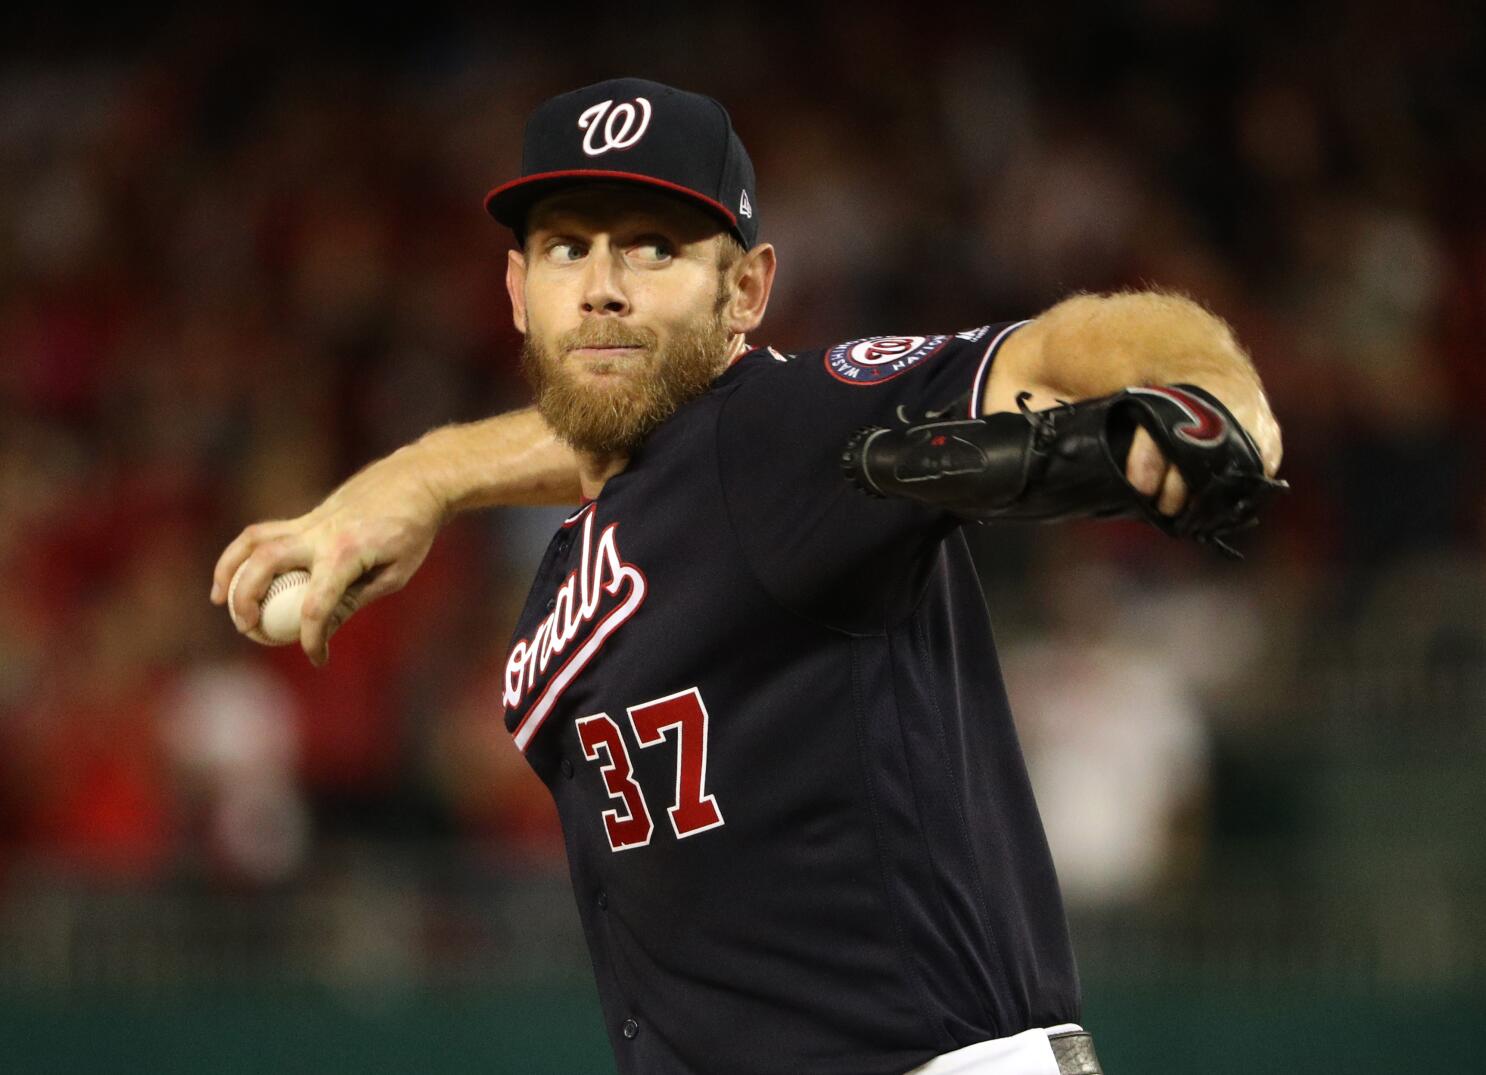 Stephen Strasburg, Nationals beat Cardinals to take 3-0 NLCS lead